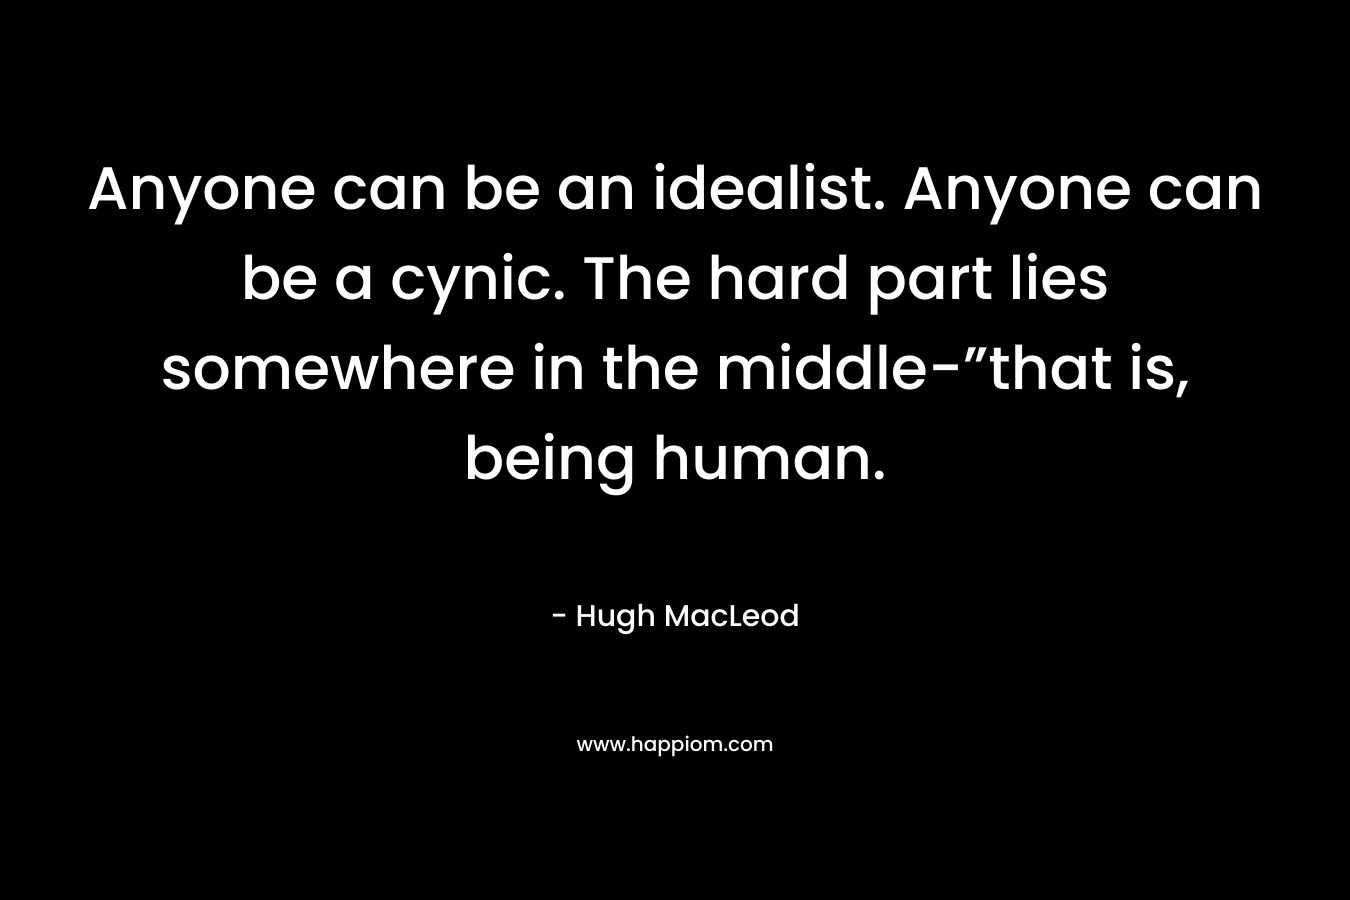 Anyone can be an idealist. Anyone can be a cynic. The hard part lies somewhere in the middle-”that is, being human. – Hugh MacLeod